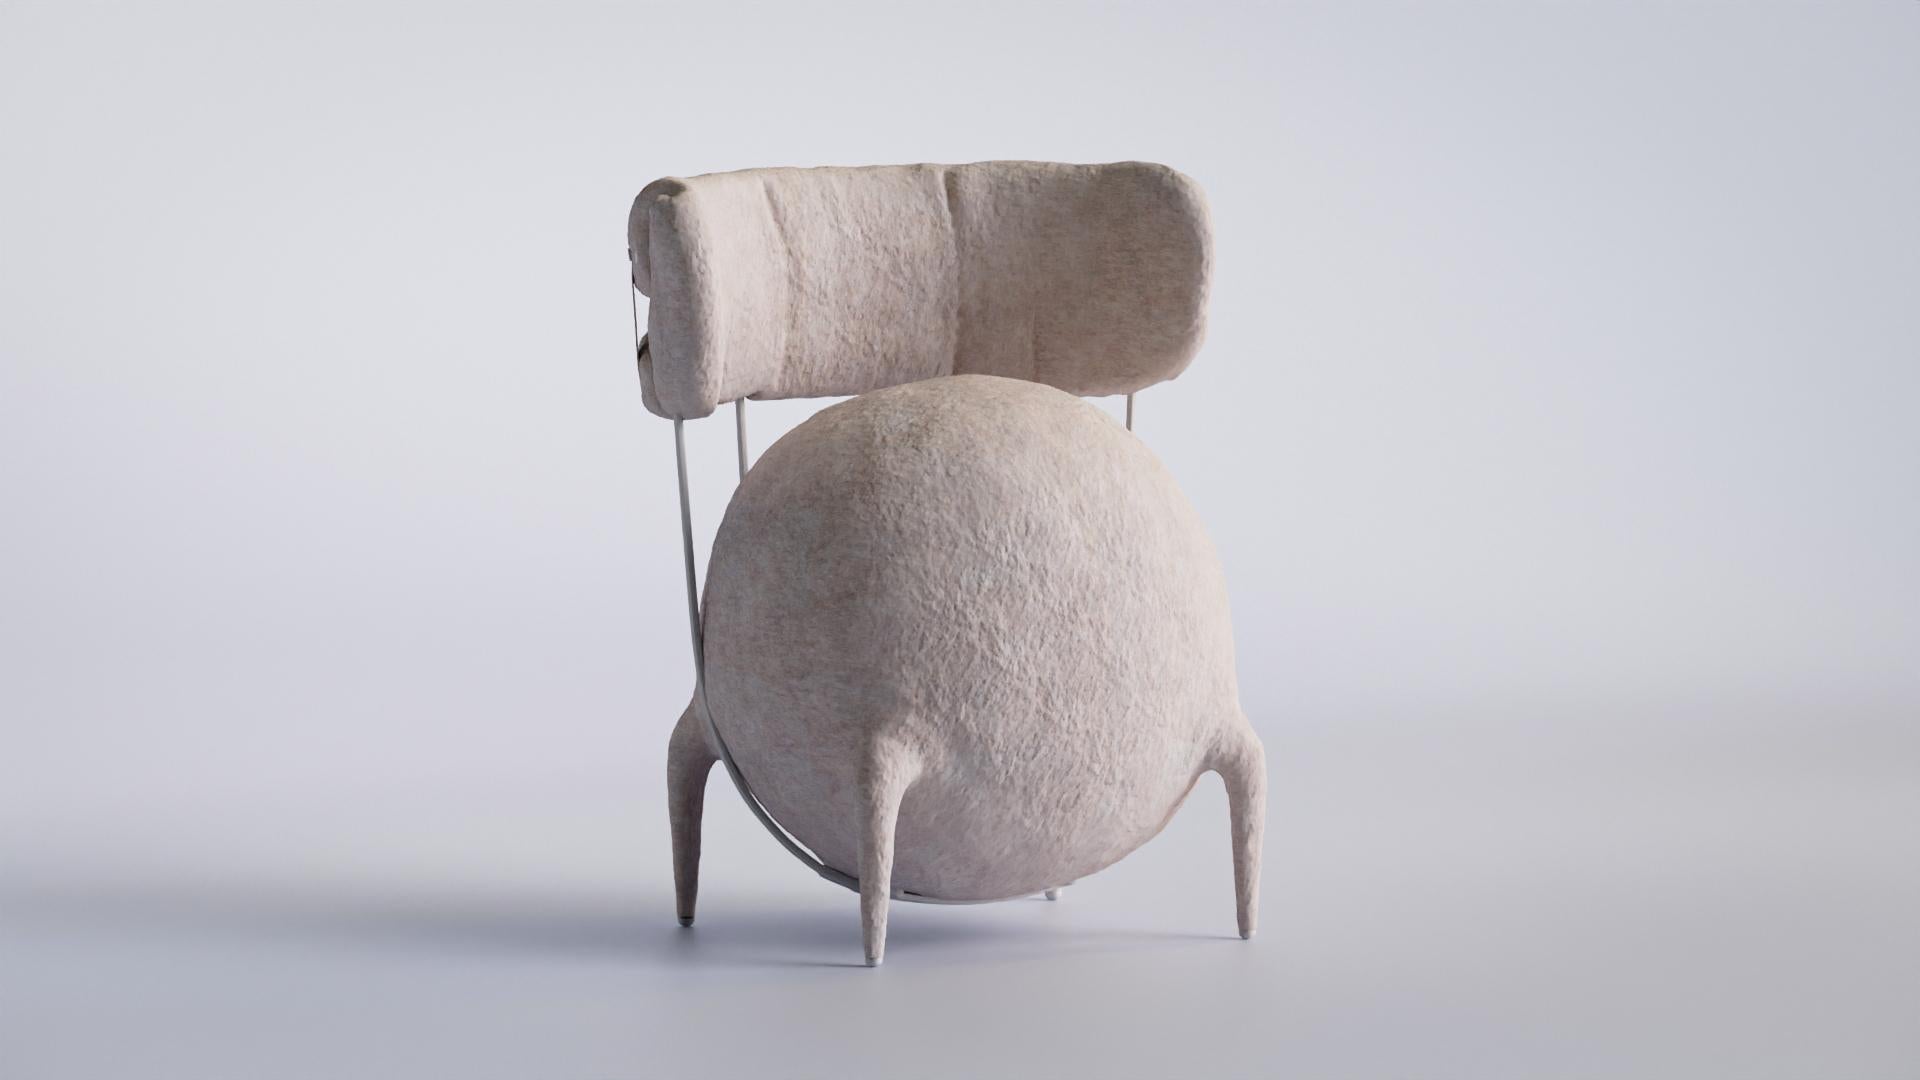 Lympho contemporary lounge chair by Taras Zheltyshev
Dimensions: 90 x 60 x 60 cm
Materials: Felt, wood, metal


This unique project is part of the “microworld” collection and
represents an image of a biological cell designed for